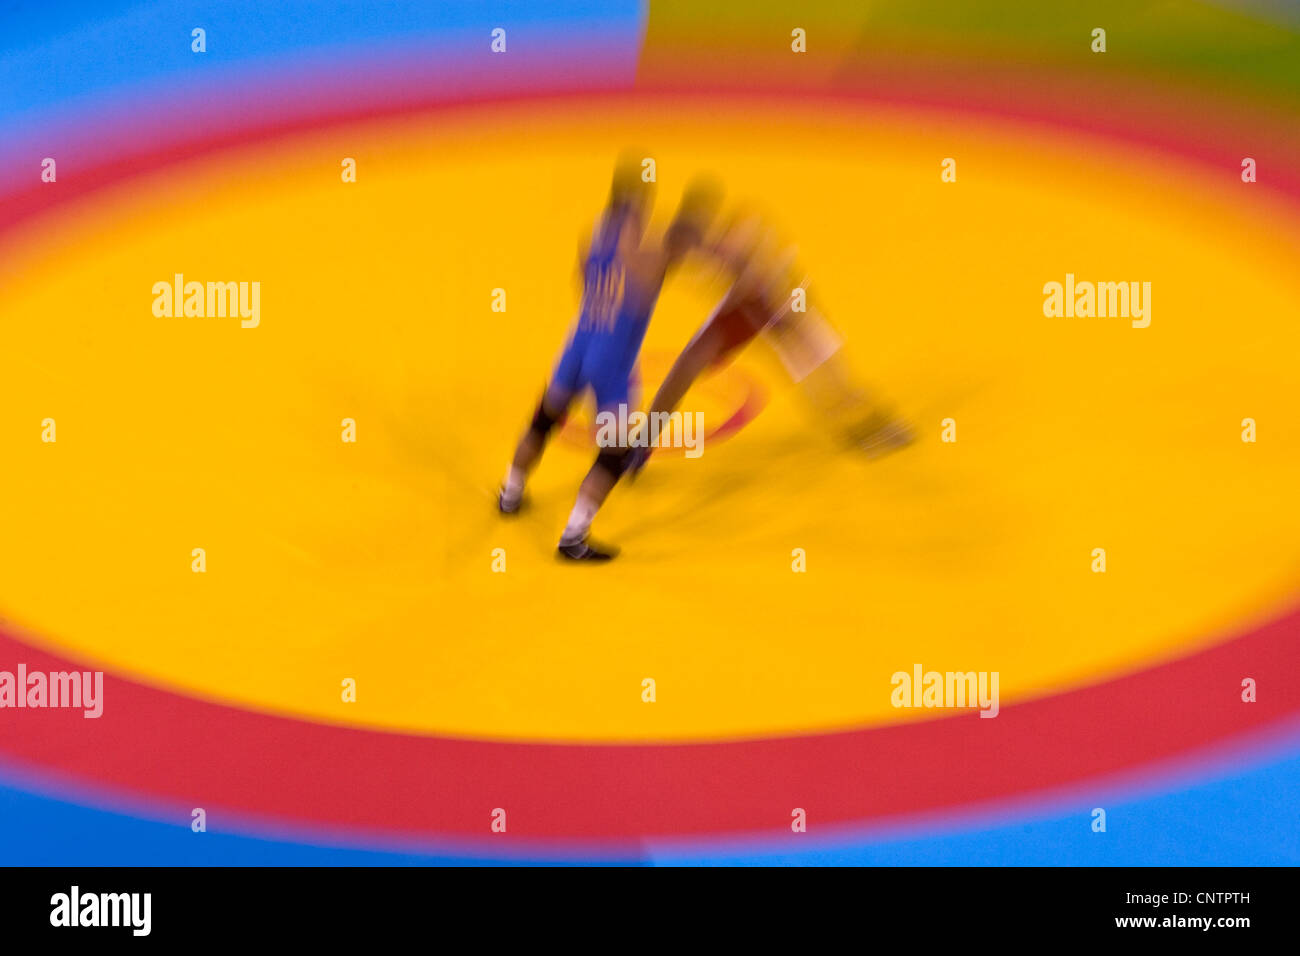 Zoom blur image of Greco Roman wrestlers in action. Stock Photo